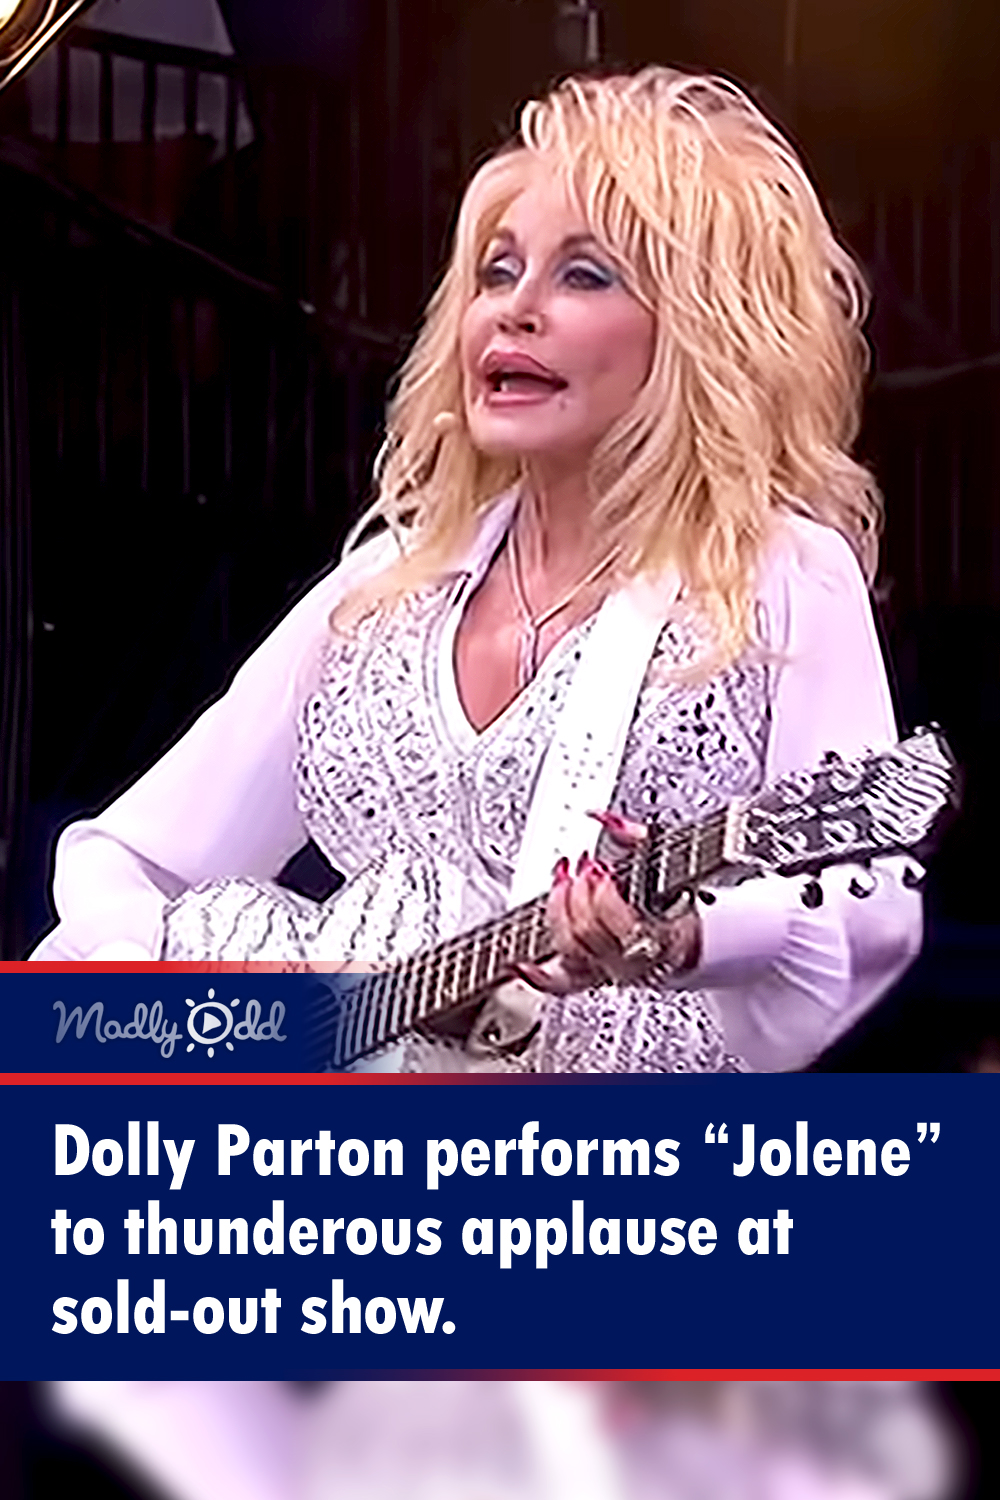 Dolly Parton performs “Jolene” to thunderous applause at sold-out show